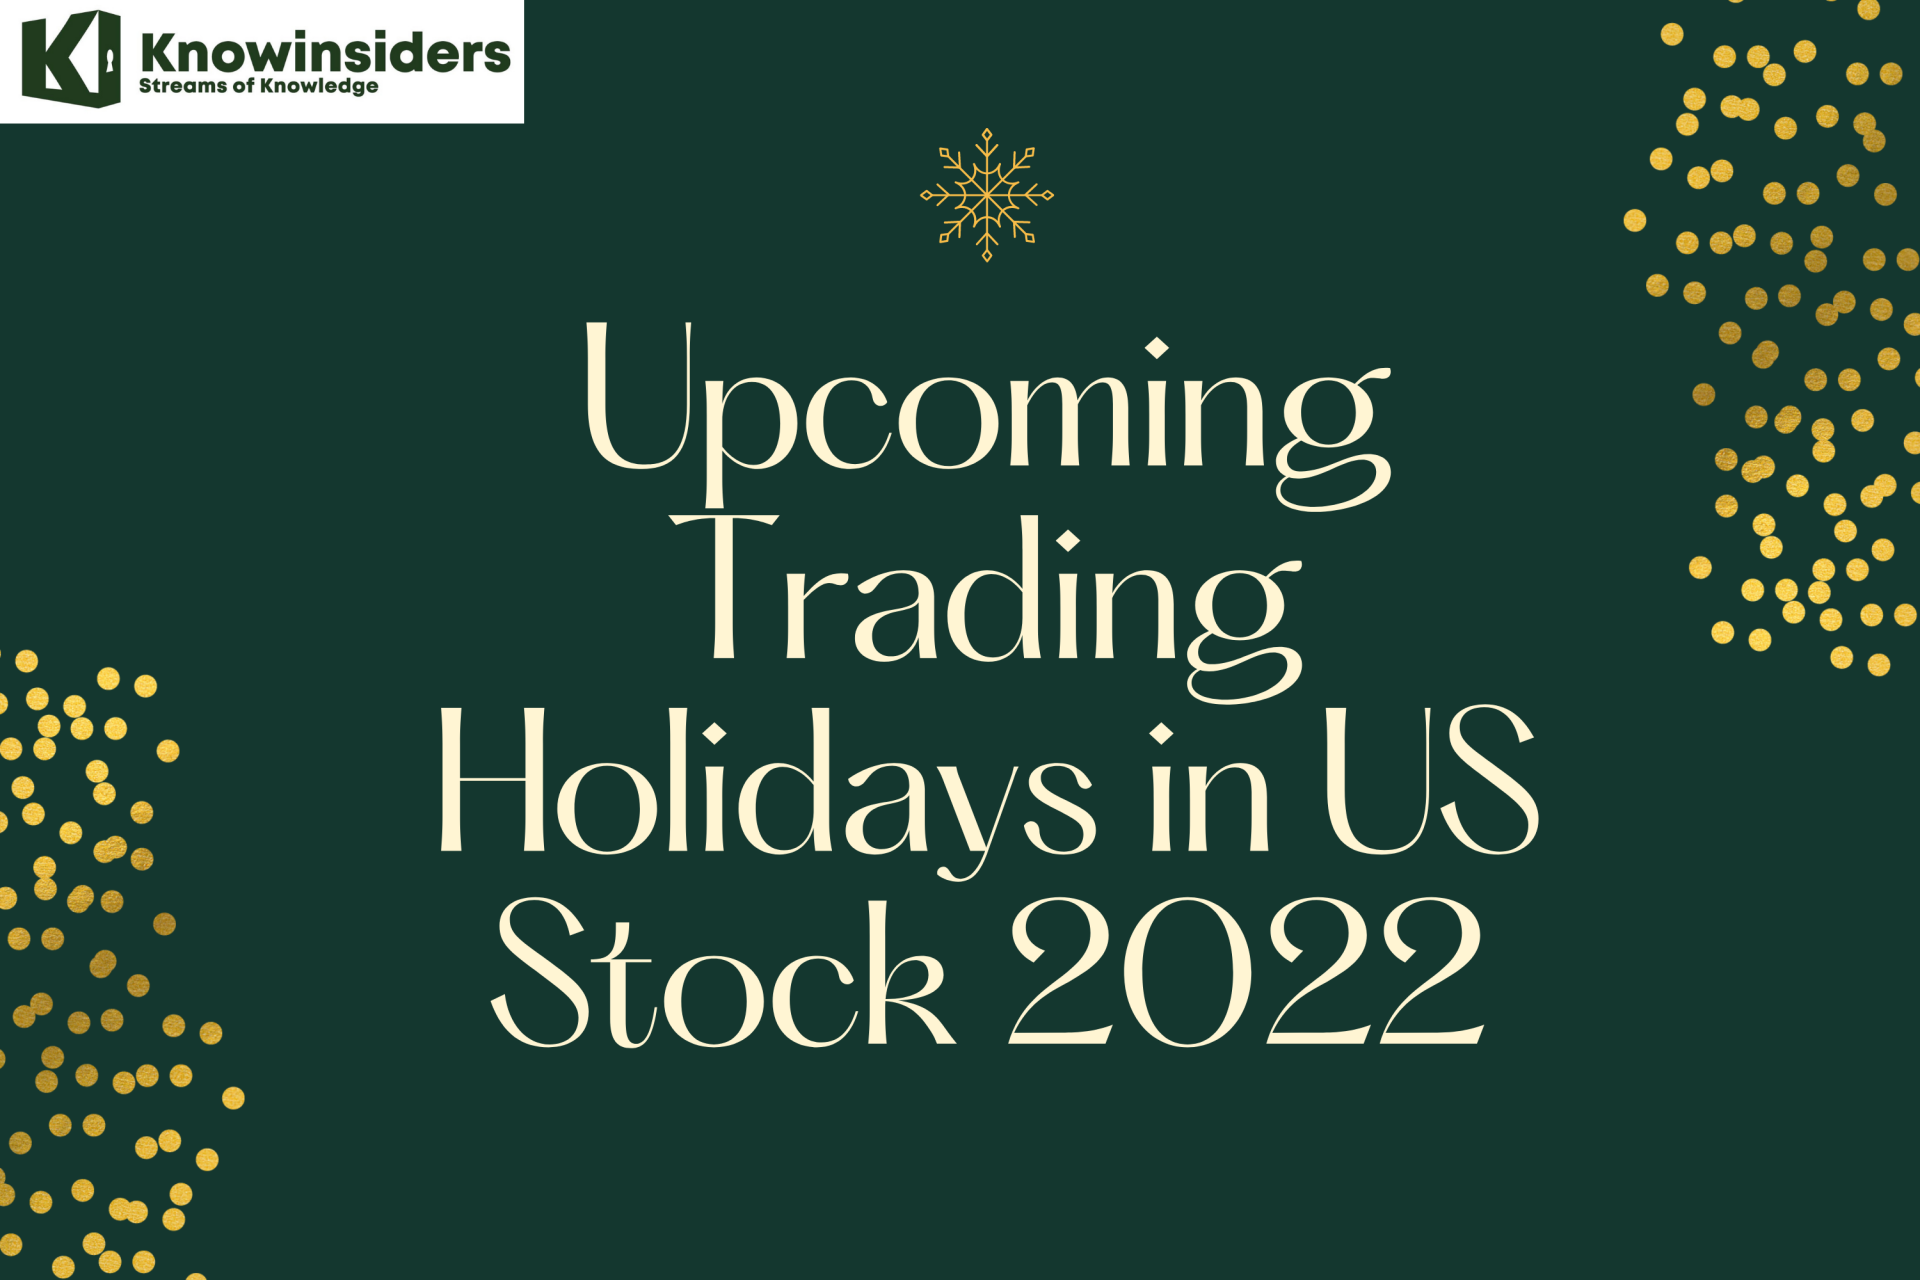 What Holidays is the U.S Stock Market Closed 2022?